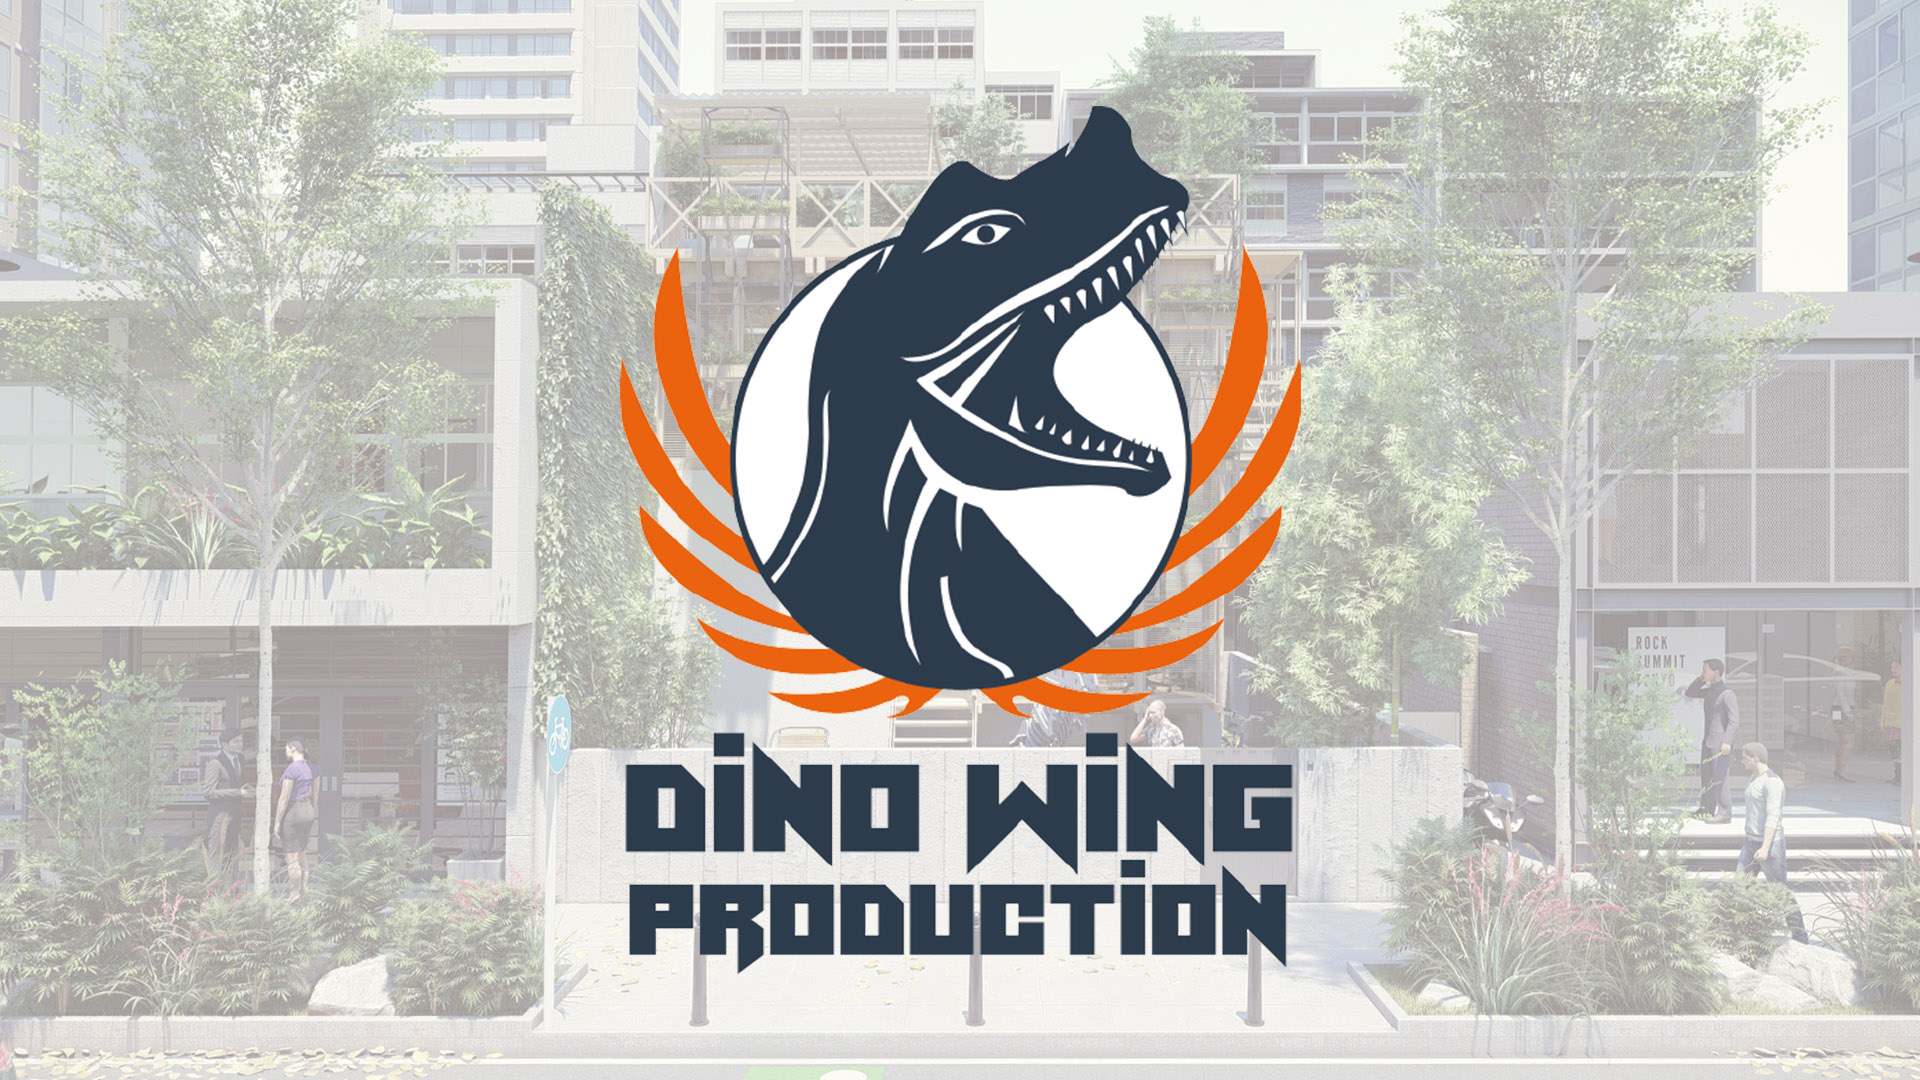 DINO WING PRODUCTION